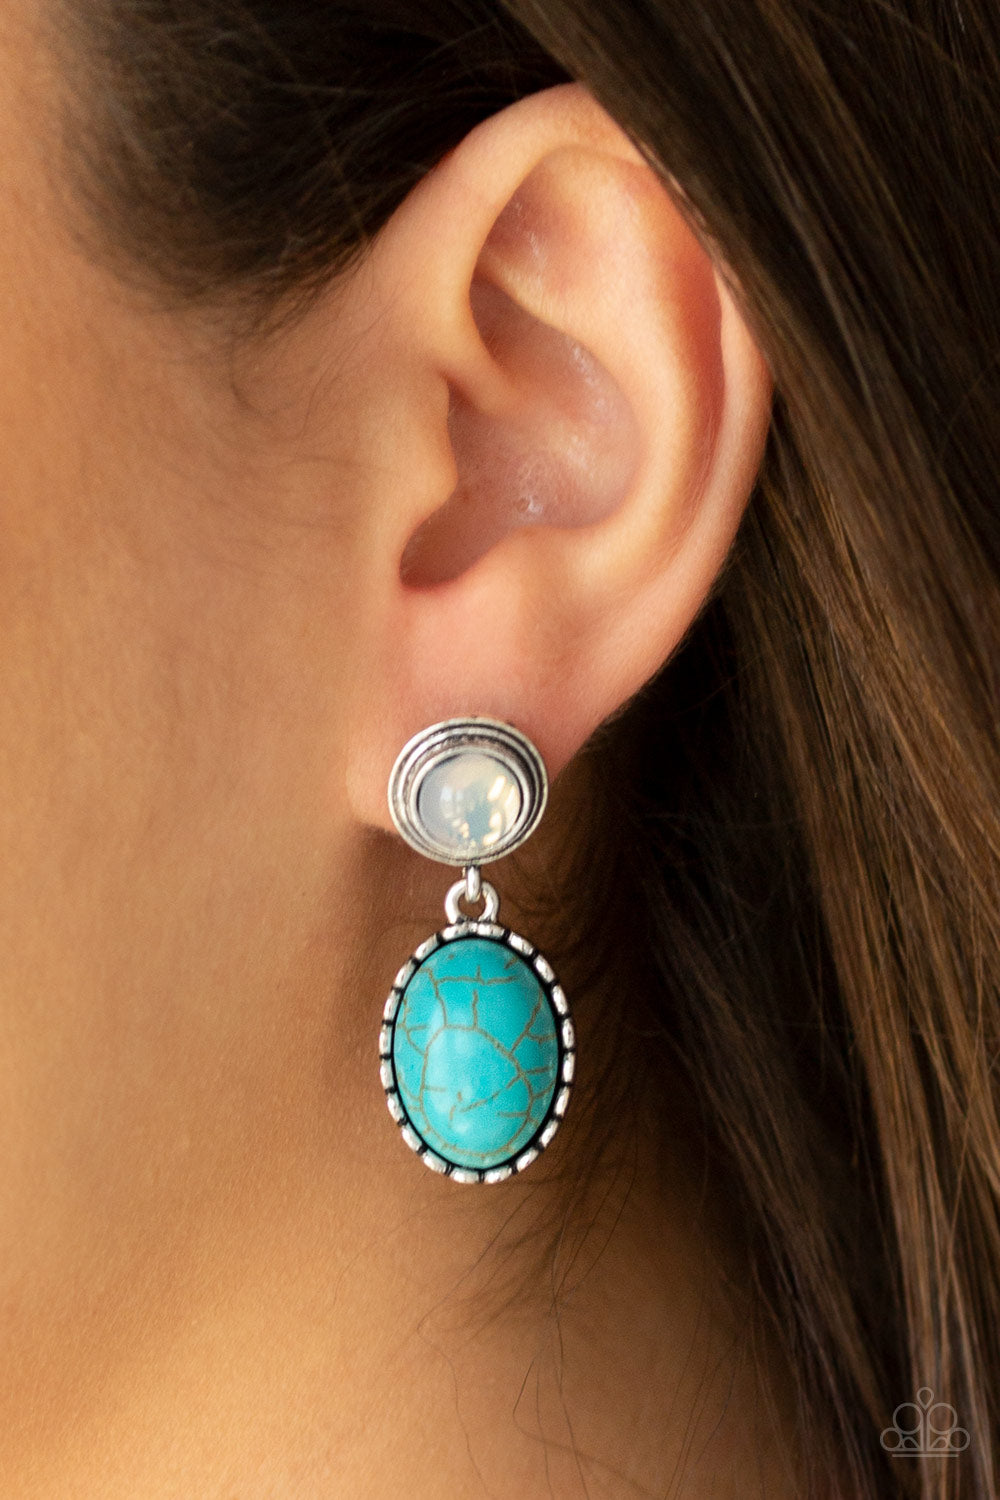 Western Oasis Blue Earring - Paparazzi Accessories